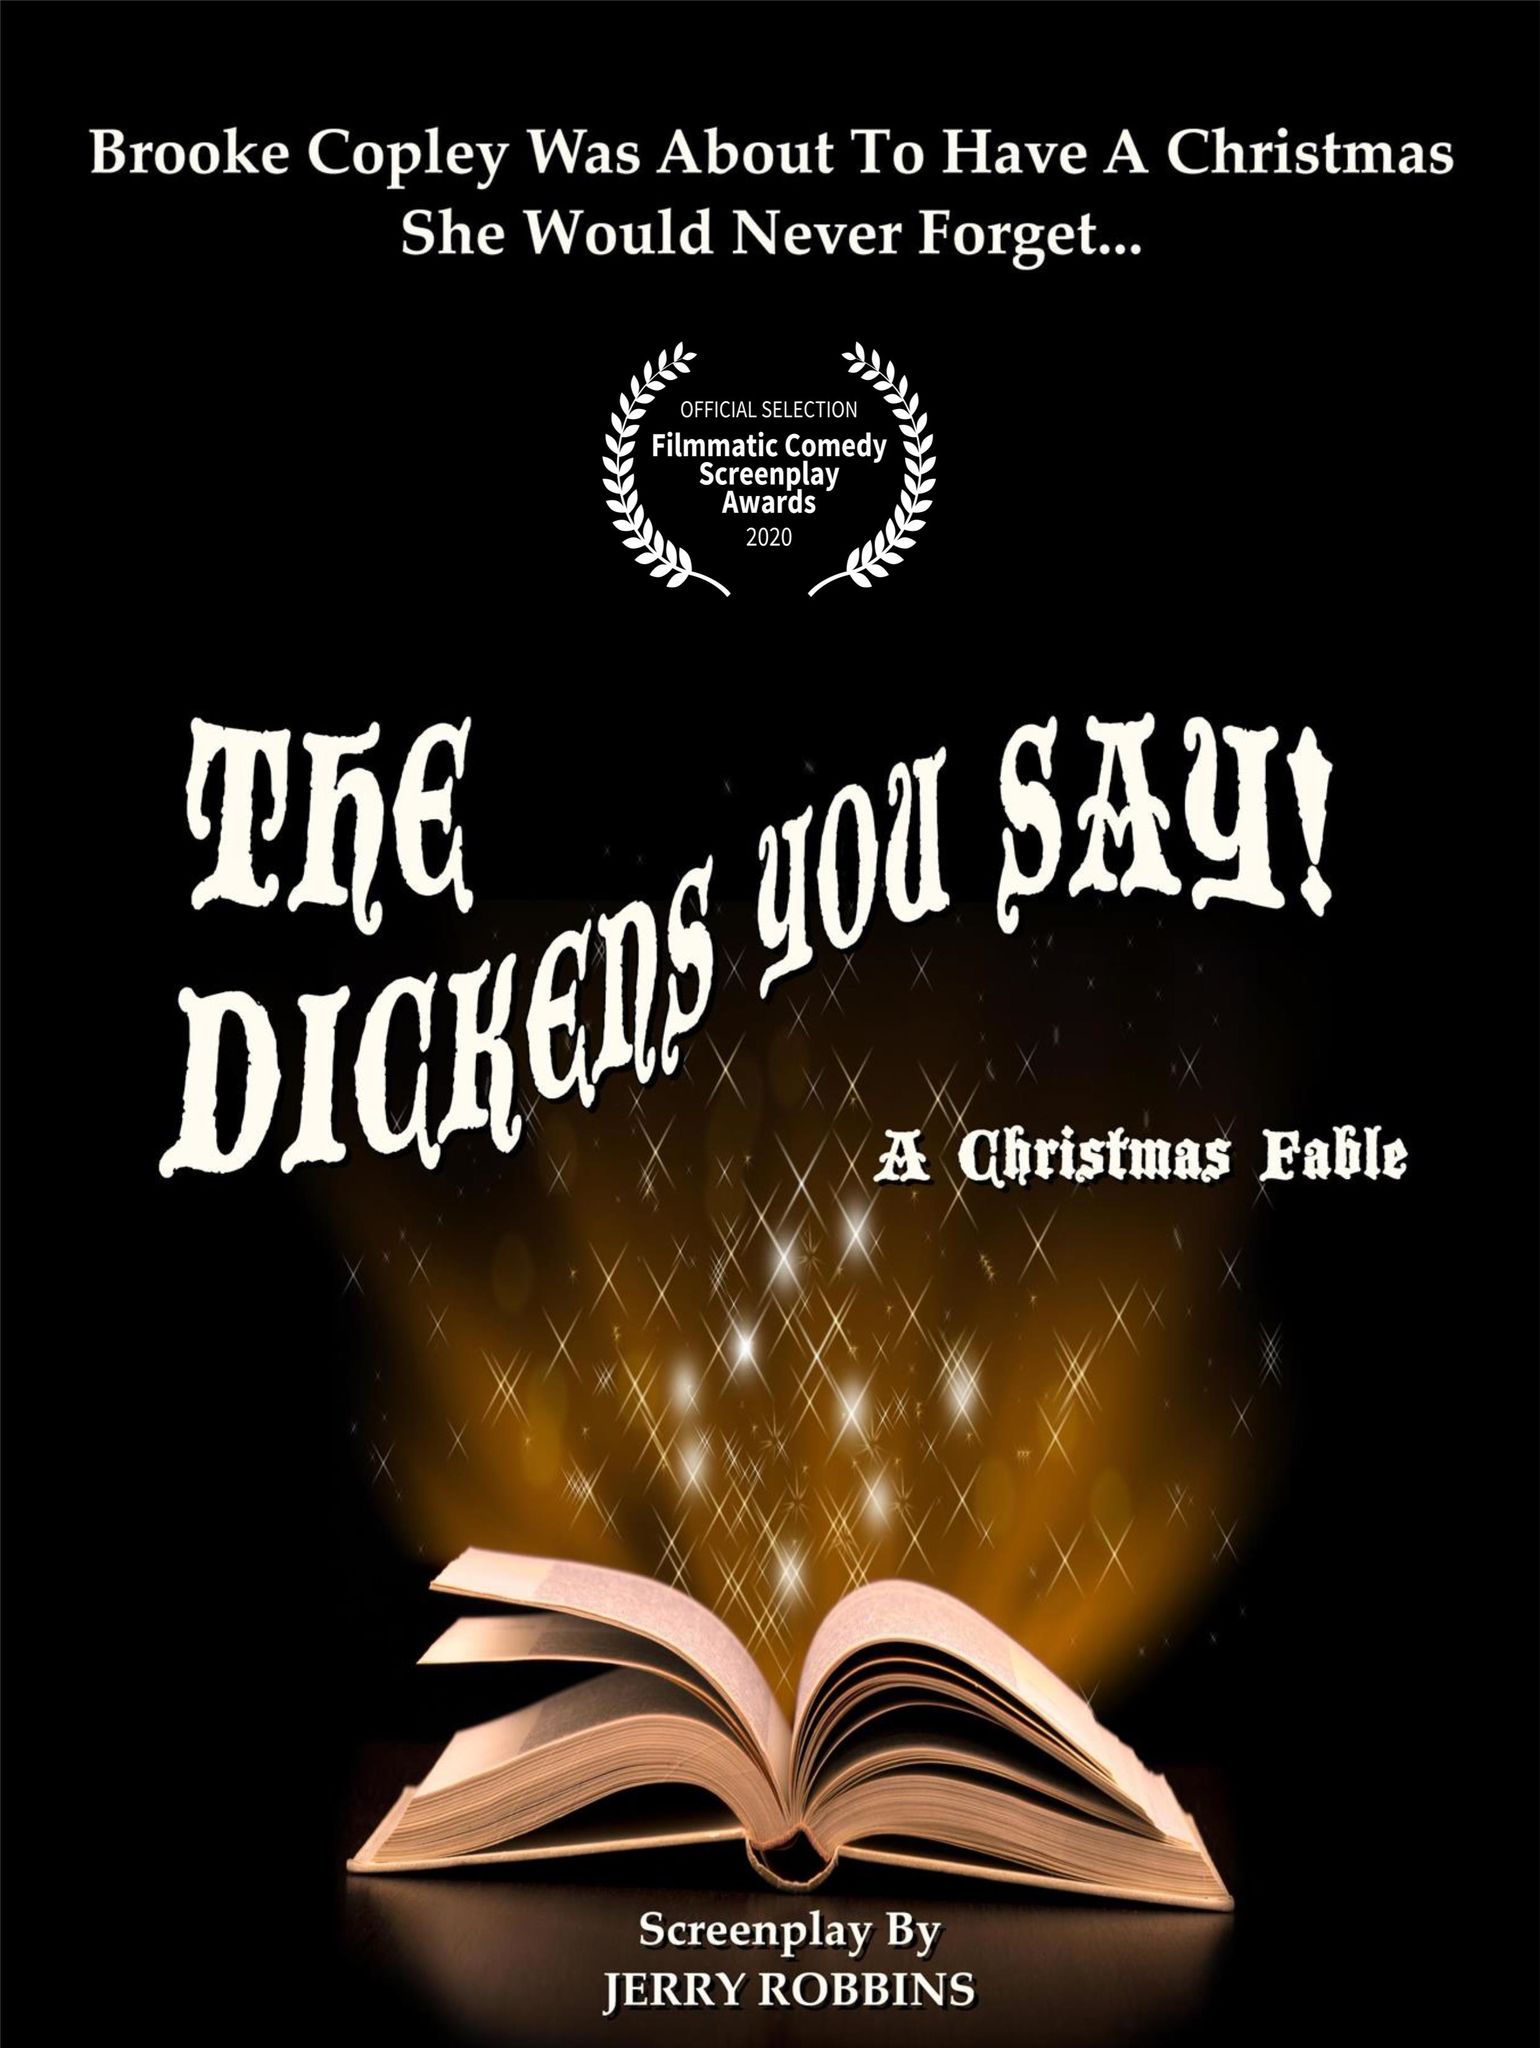 THE DICKENS YOU SAY